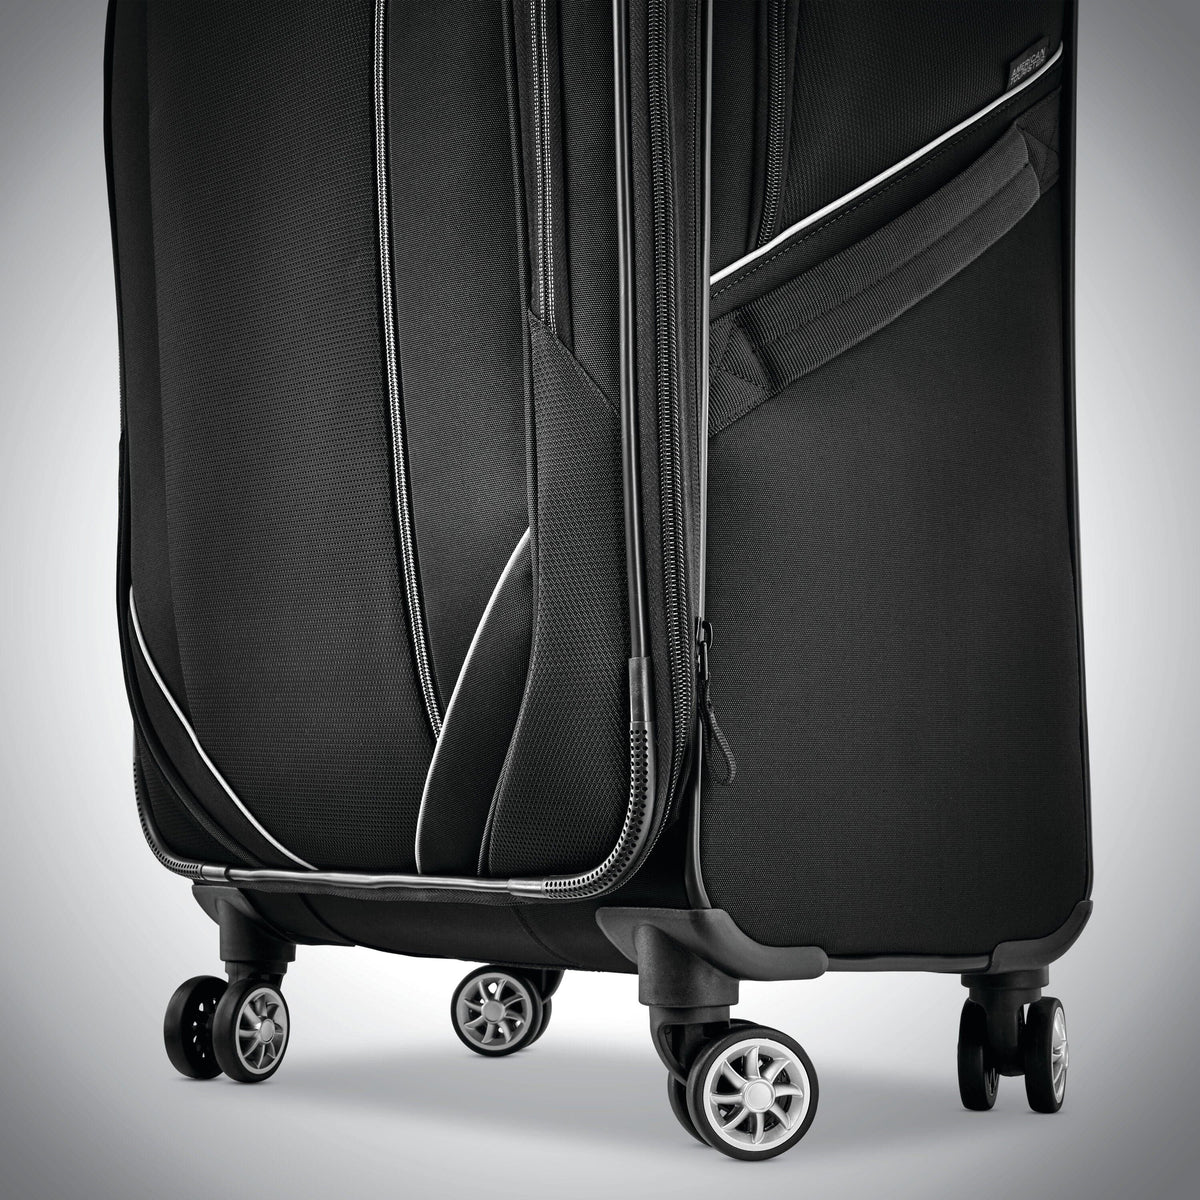 American Tourister Zoom Turbo 28" Spinner Luggage